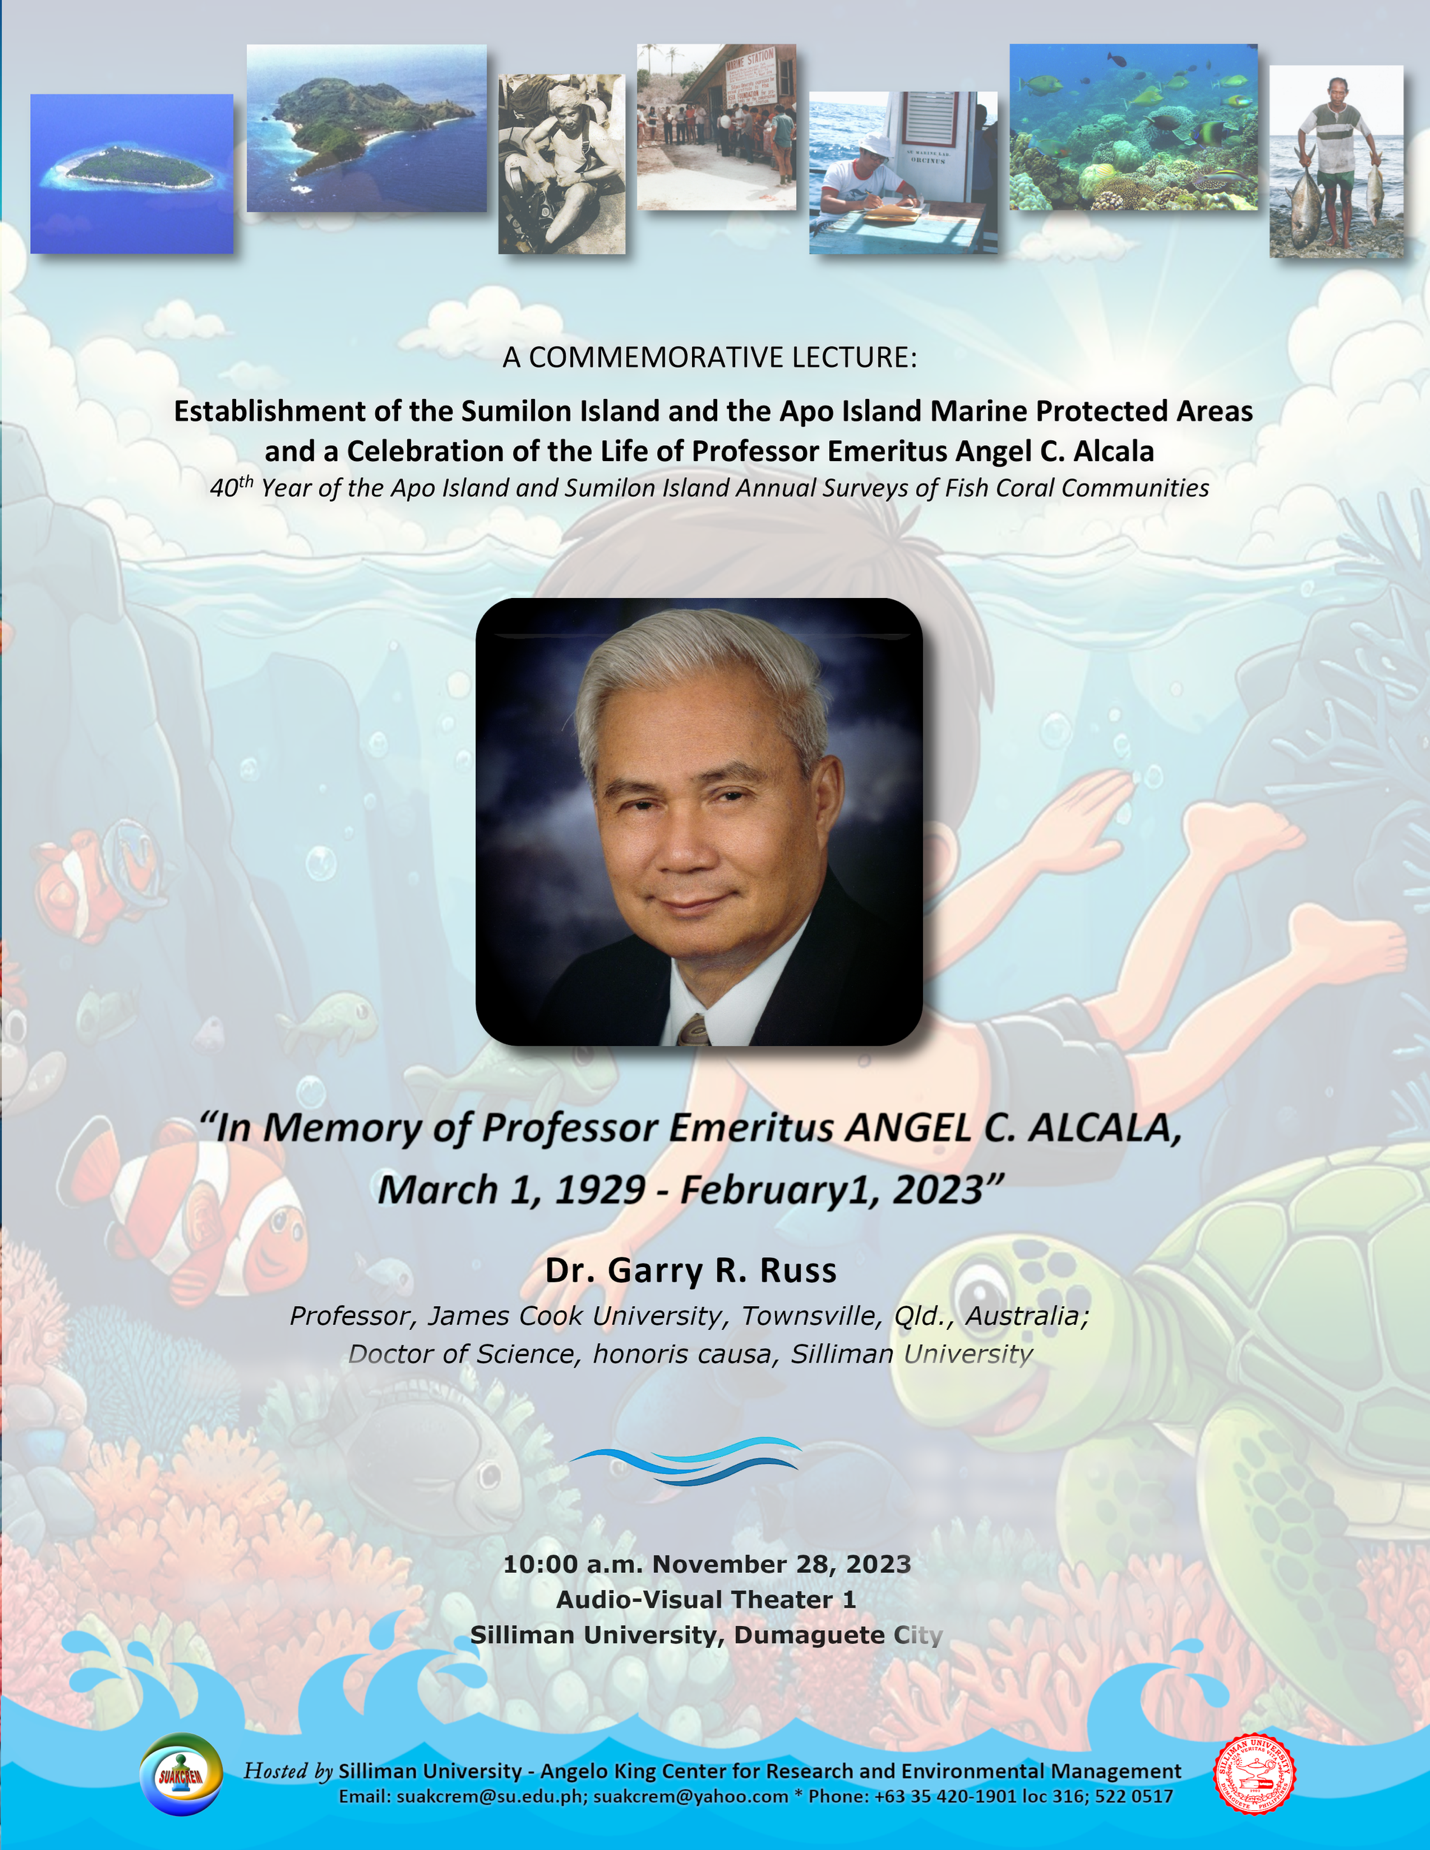 SUAKCREM holds commemorative lecture on marine protected areas, celebrates life of nat’l scientist